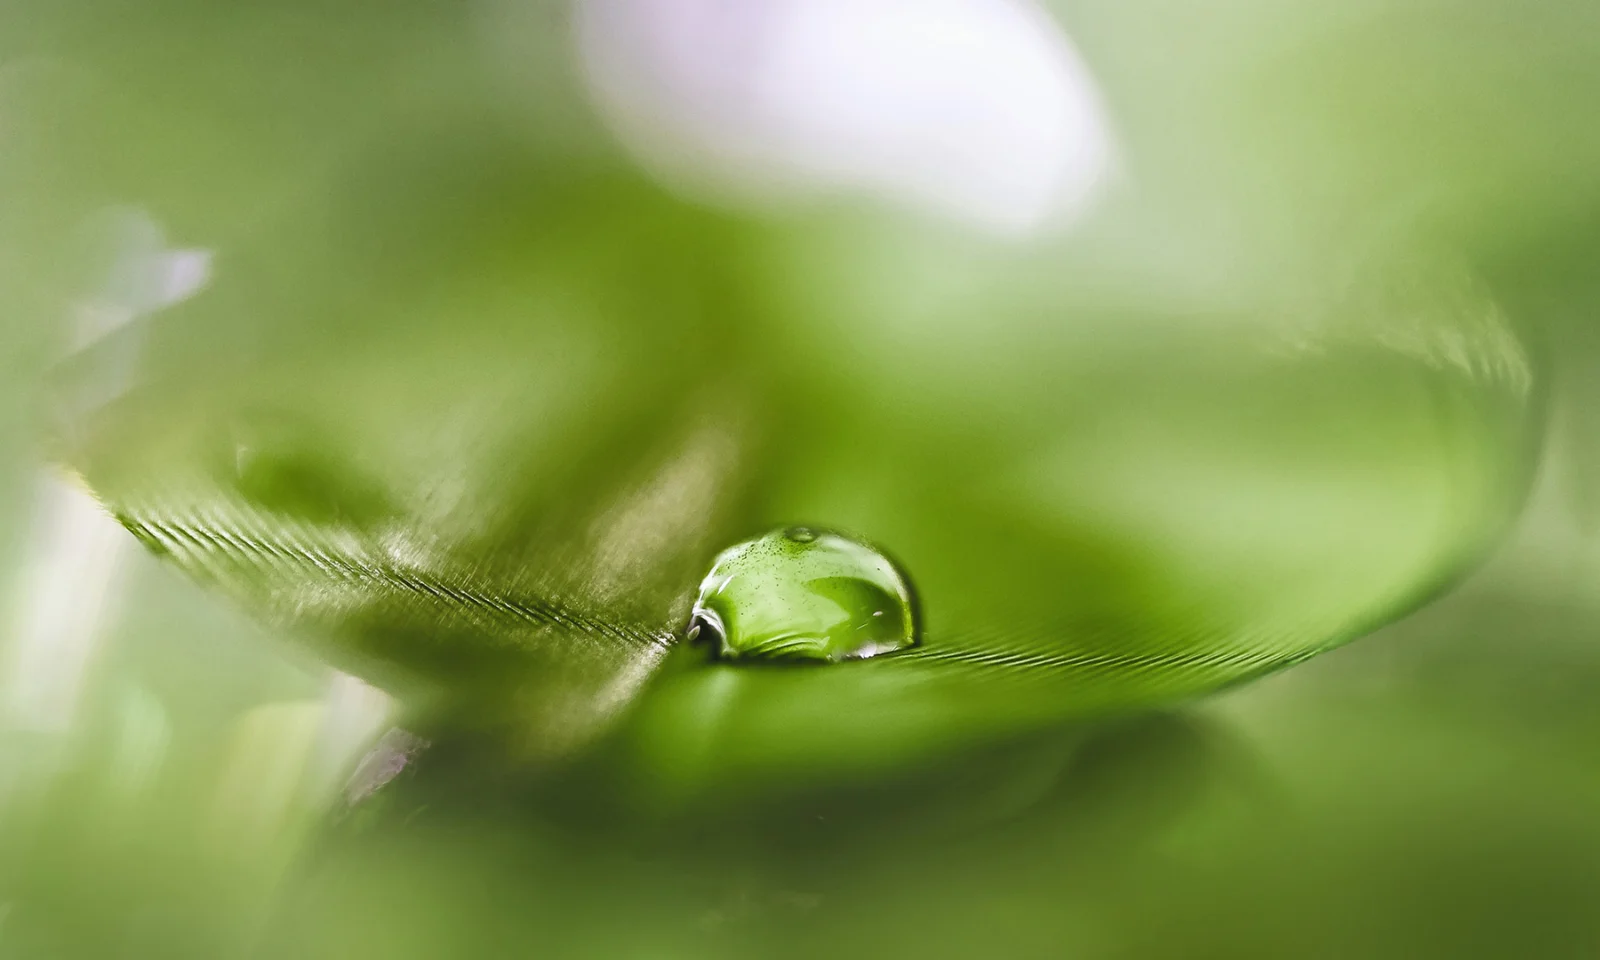 The image showcases a macro photograph of a single water droplet delicately balanced on a green leaf. The vibrant green background provides a serene and natural setting, highlighting the purity and freshness of nature. The water droplet reflects the surrounding environment, symbolizing sustainability, growth, and a strong connection to the natural world. This image is perfect for illustrating concepts related to green bonds, environmental responsibility, and sustainable finance, emphasizing the importance of eco-friendly investments and initiatives.